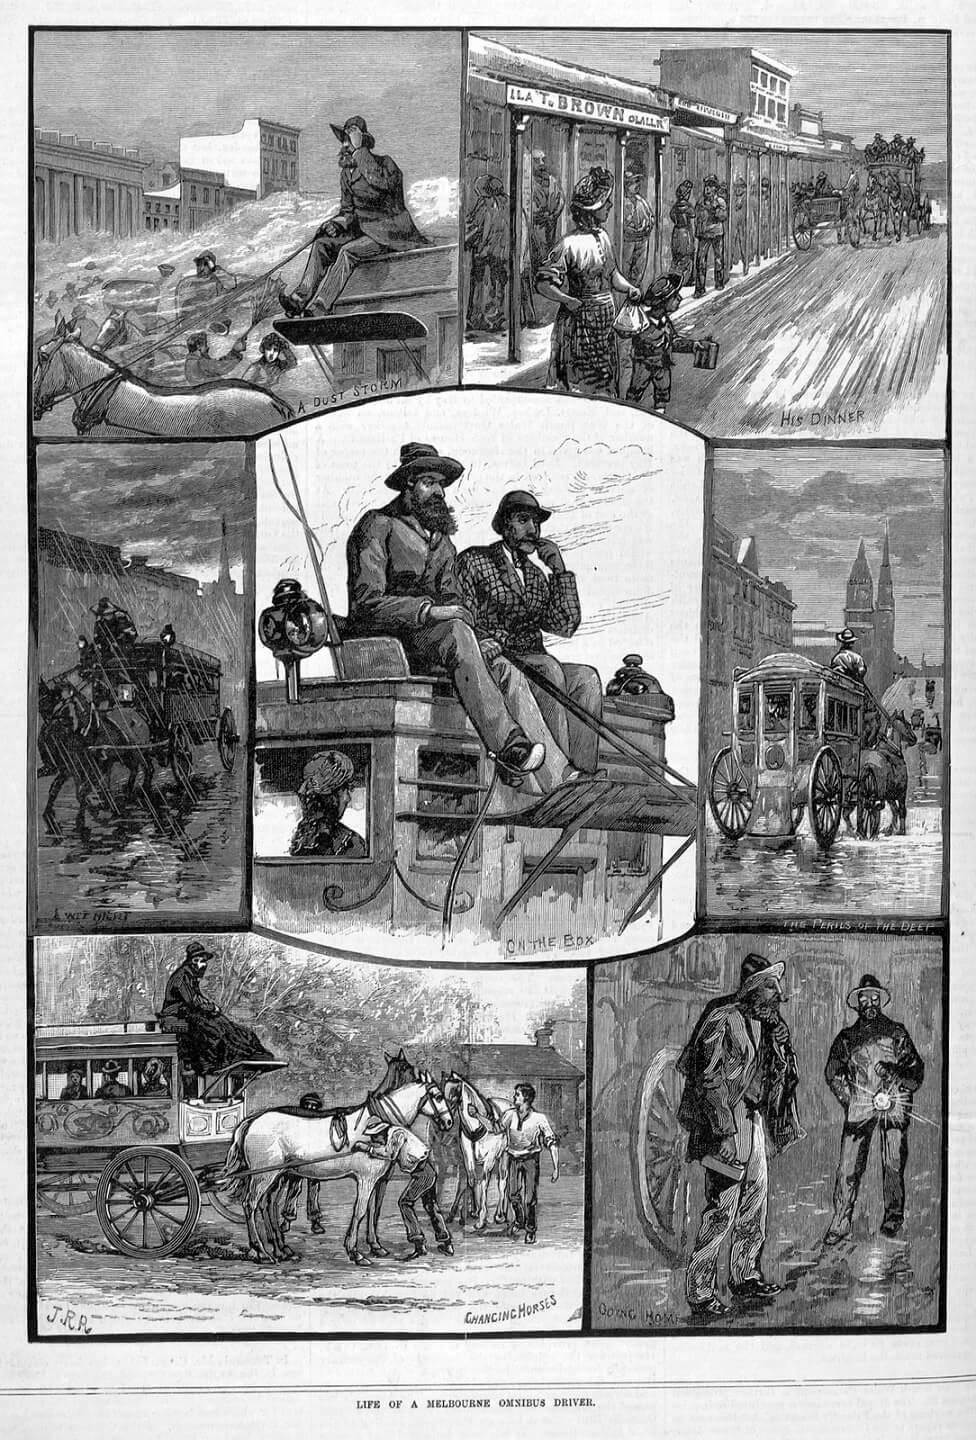 'Life of a Melbourne omnibus driver, by Julian Rossi Ashton, artist, printed by Alfred Martin Ebsworth, 1882